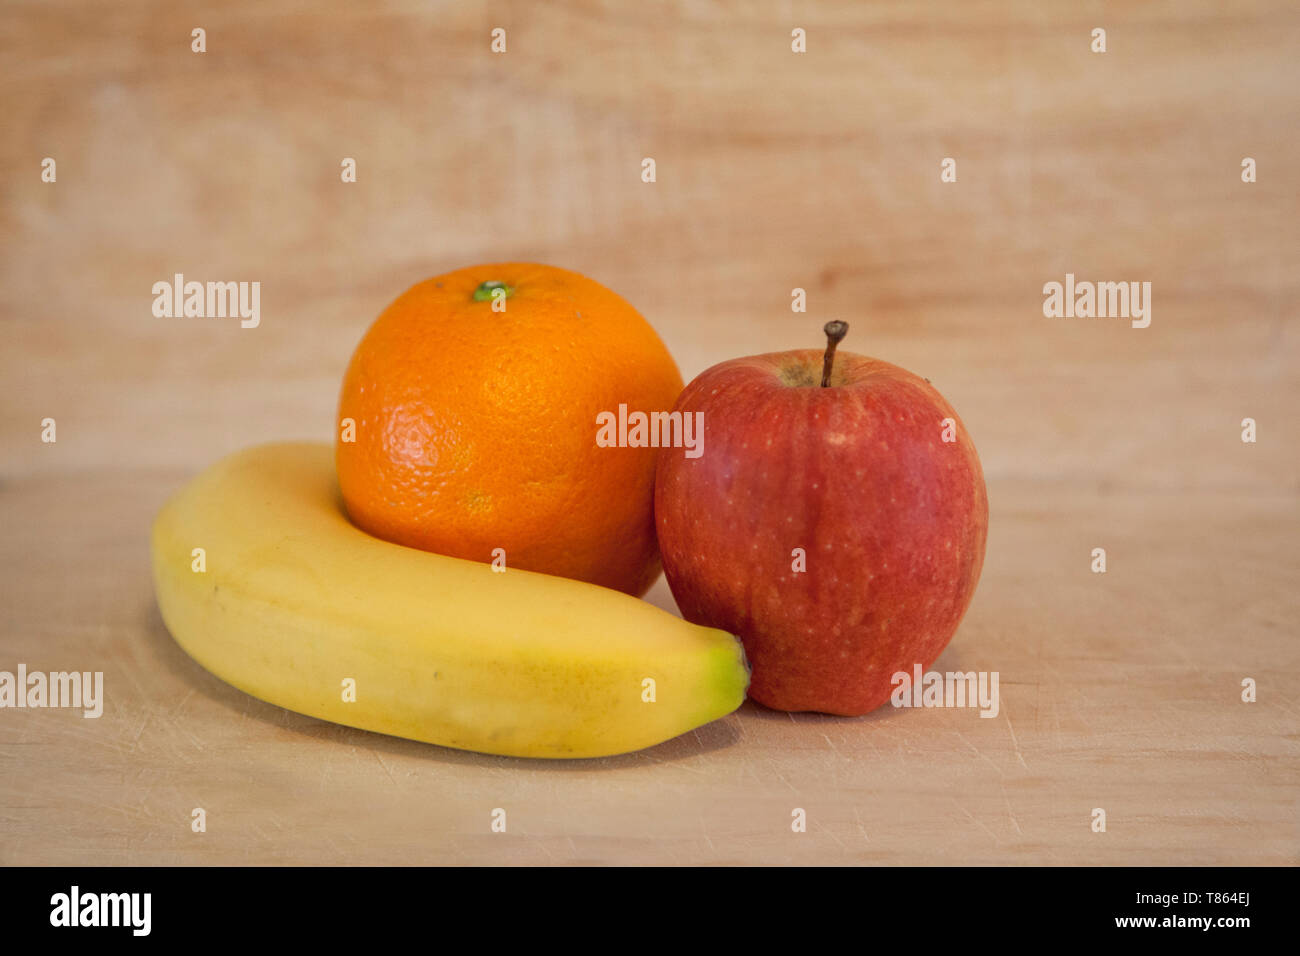 An apple, orange and banana are a healthy combination of snacks